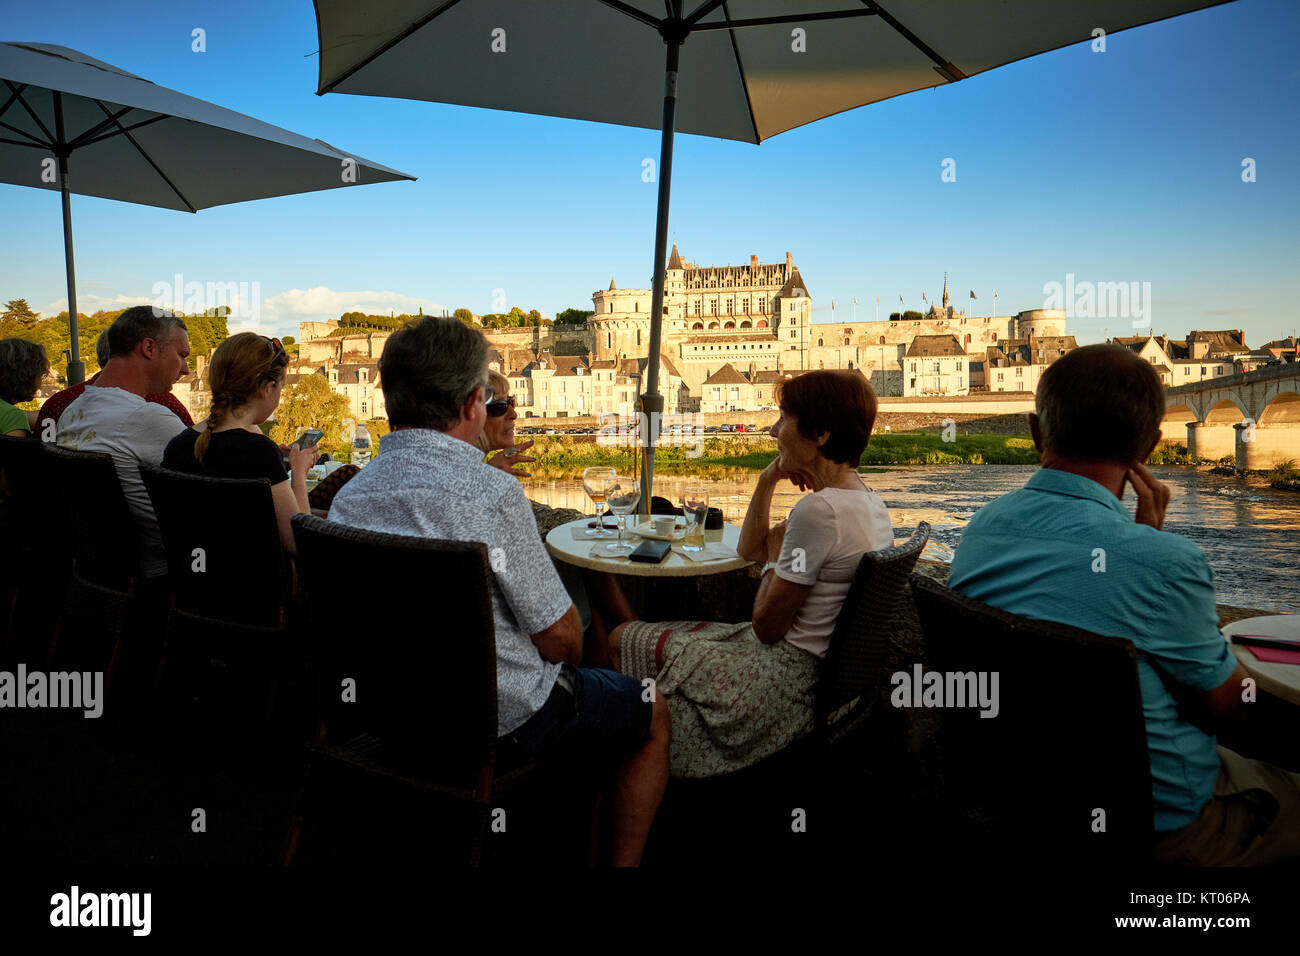 Eating and drinking outside at sunset in Amboise in the Loire Valley France Stock Photo